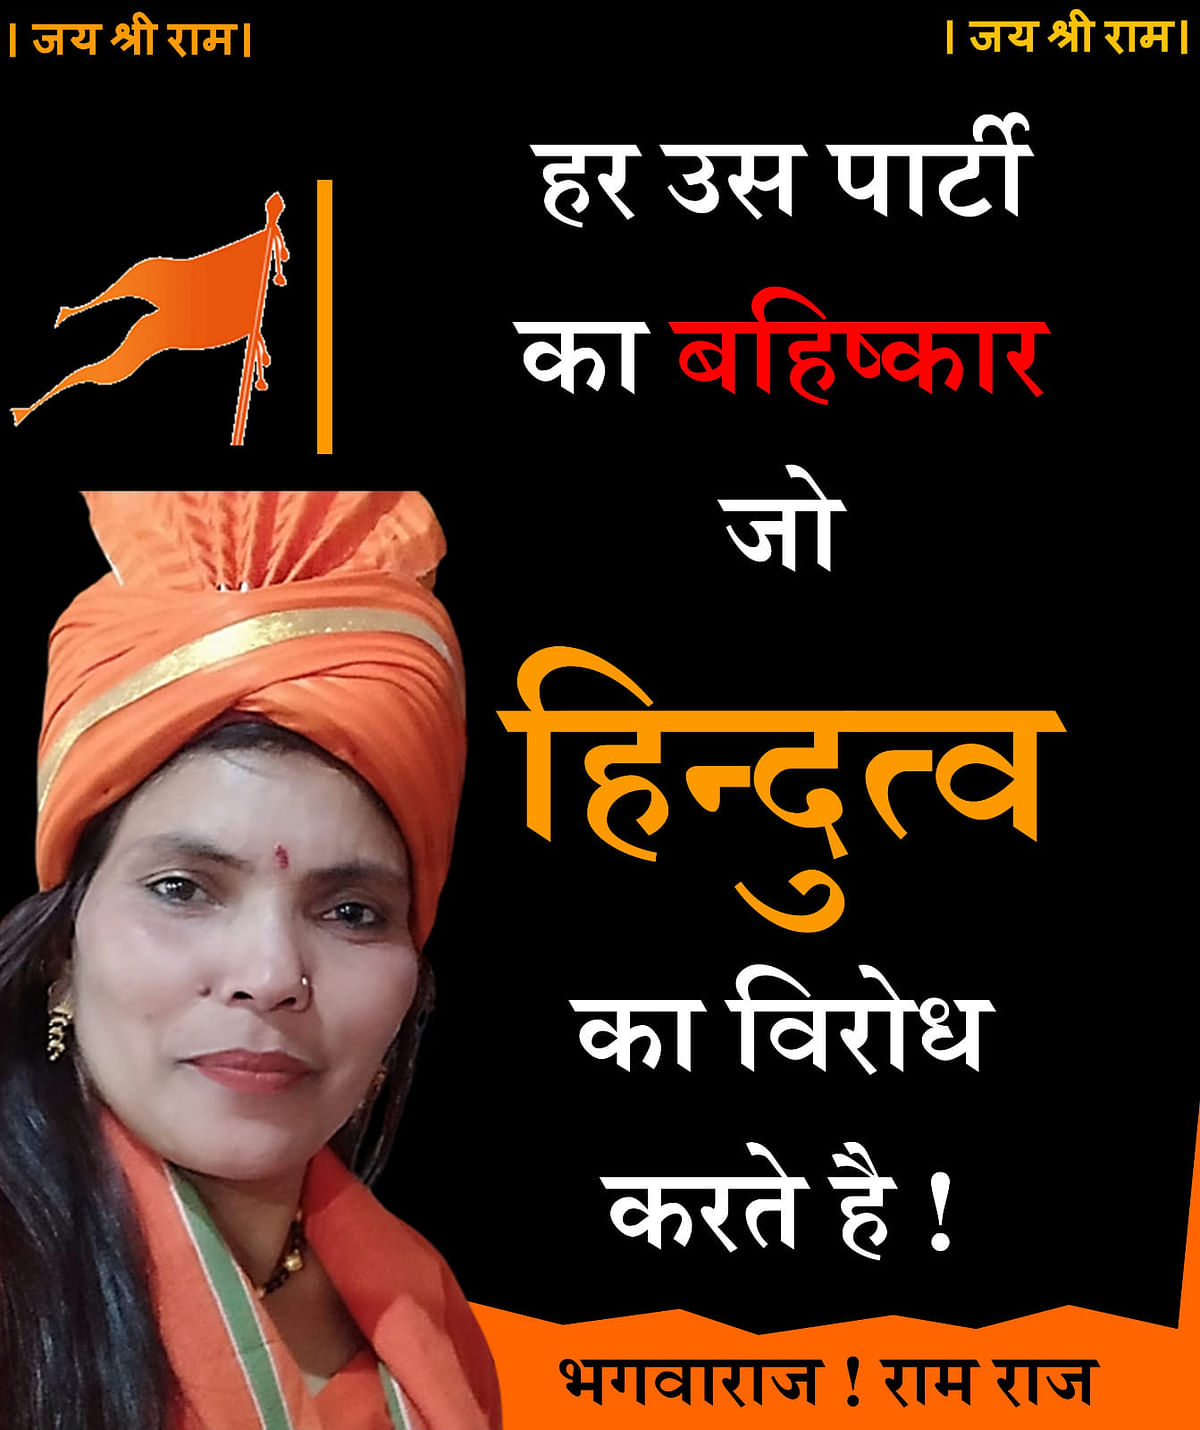 Uttarakhand's Radha Semwal Dhoni is angry at Hindus for visiting mazars and at BJP for not removing the structures.